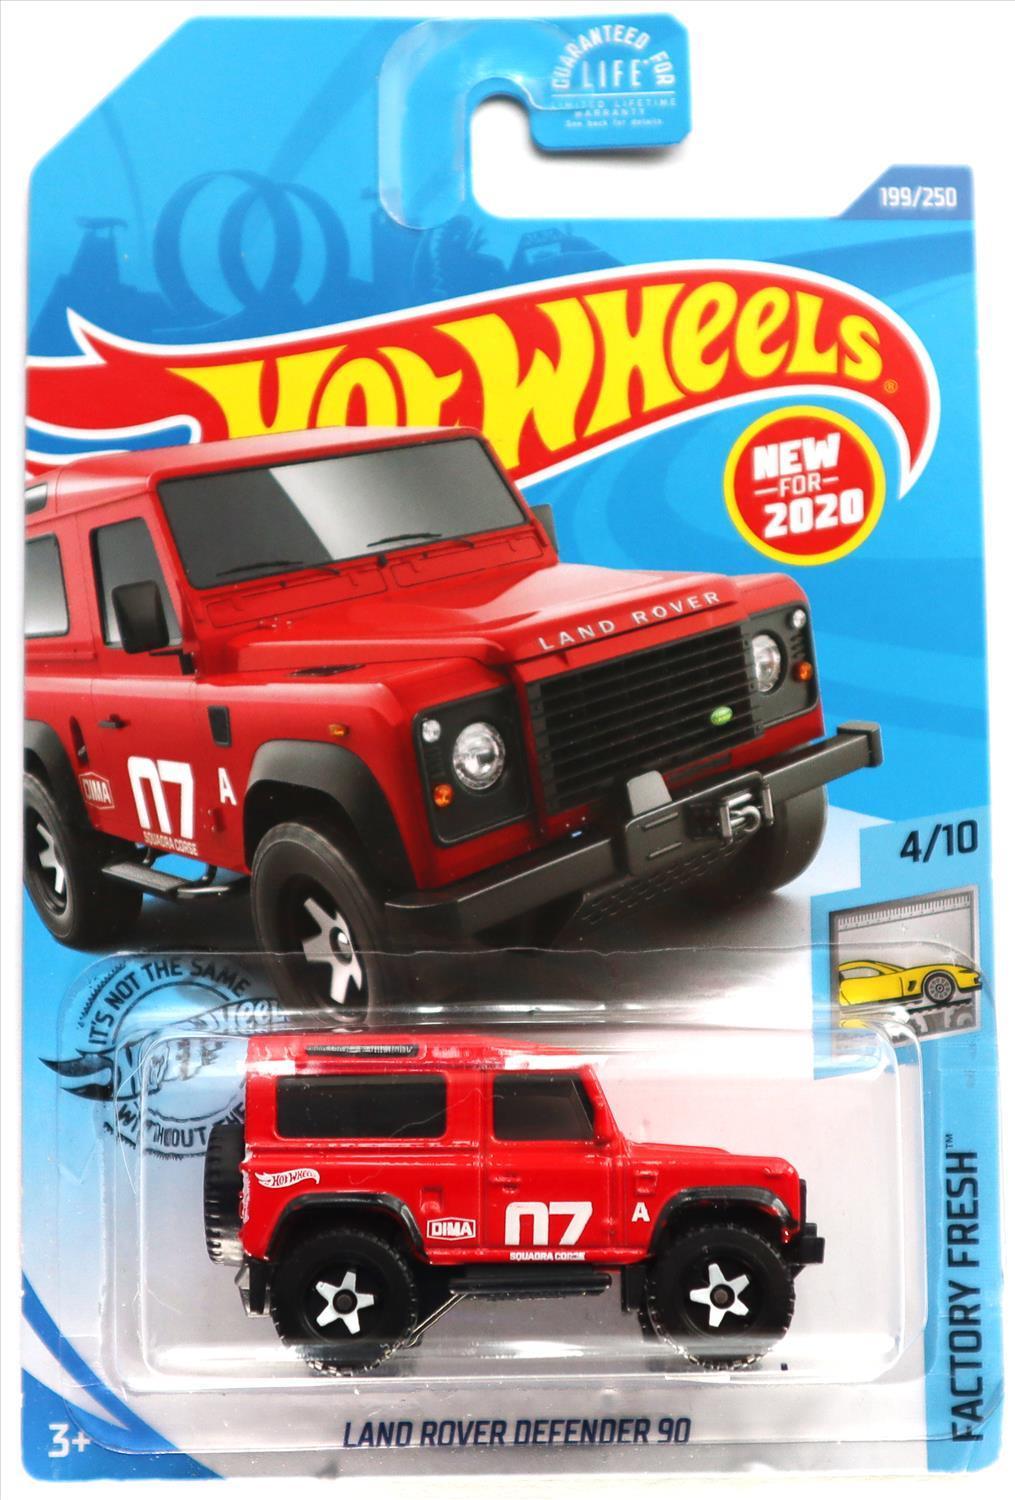 Hot Wheels 2020 - Collector # 199/250 - Factory Fresh 4/10 - New Models - Land Rover Defender 90 - Red - USA